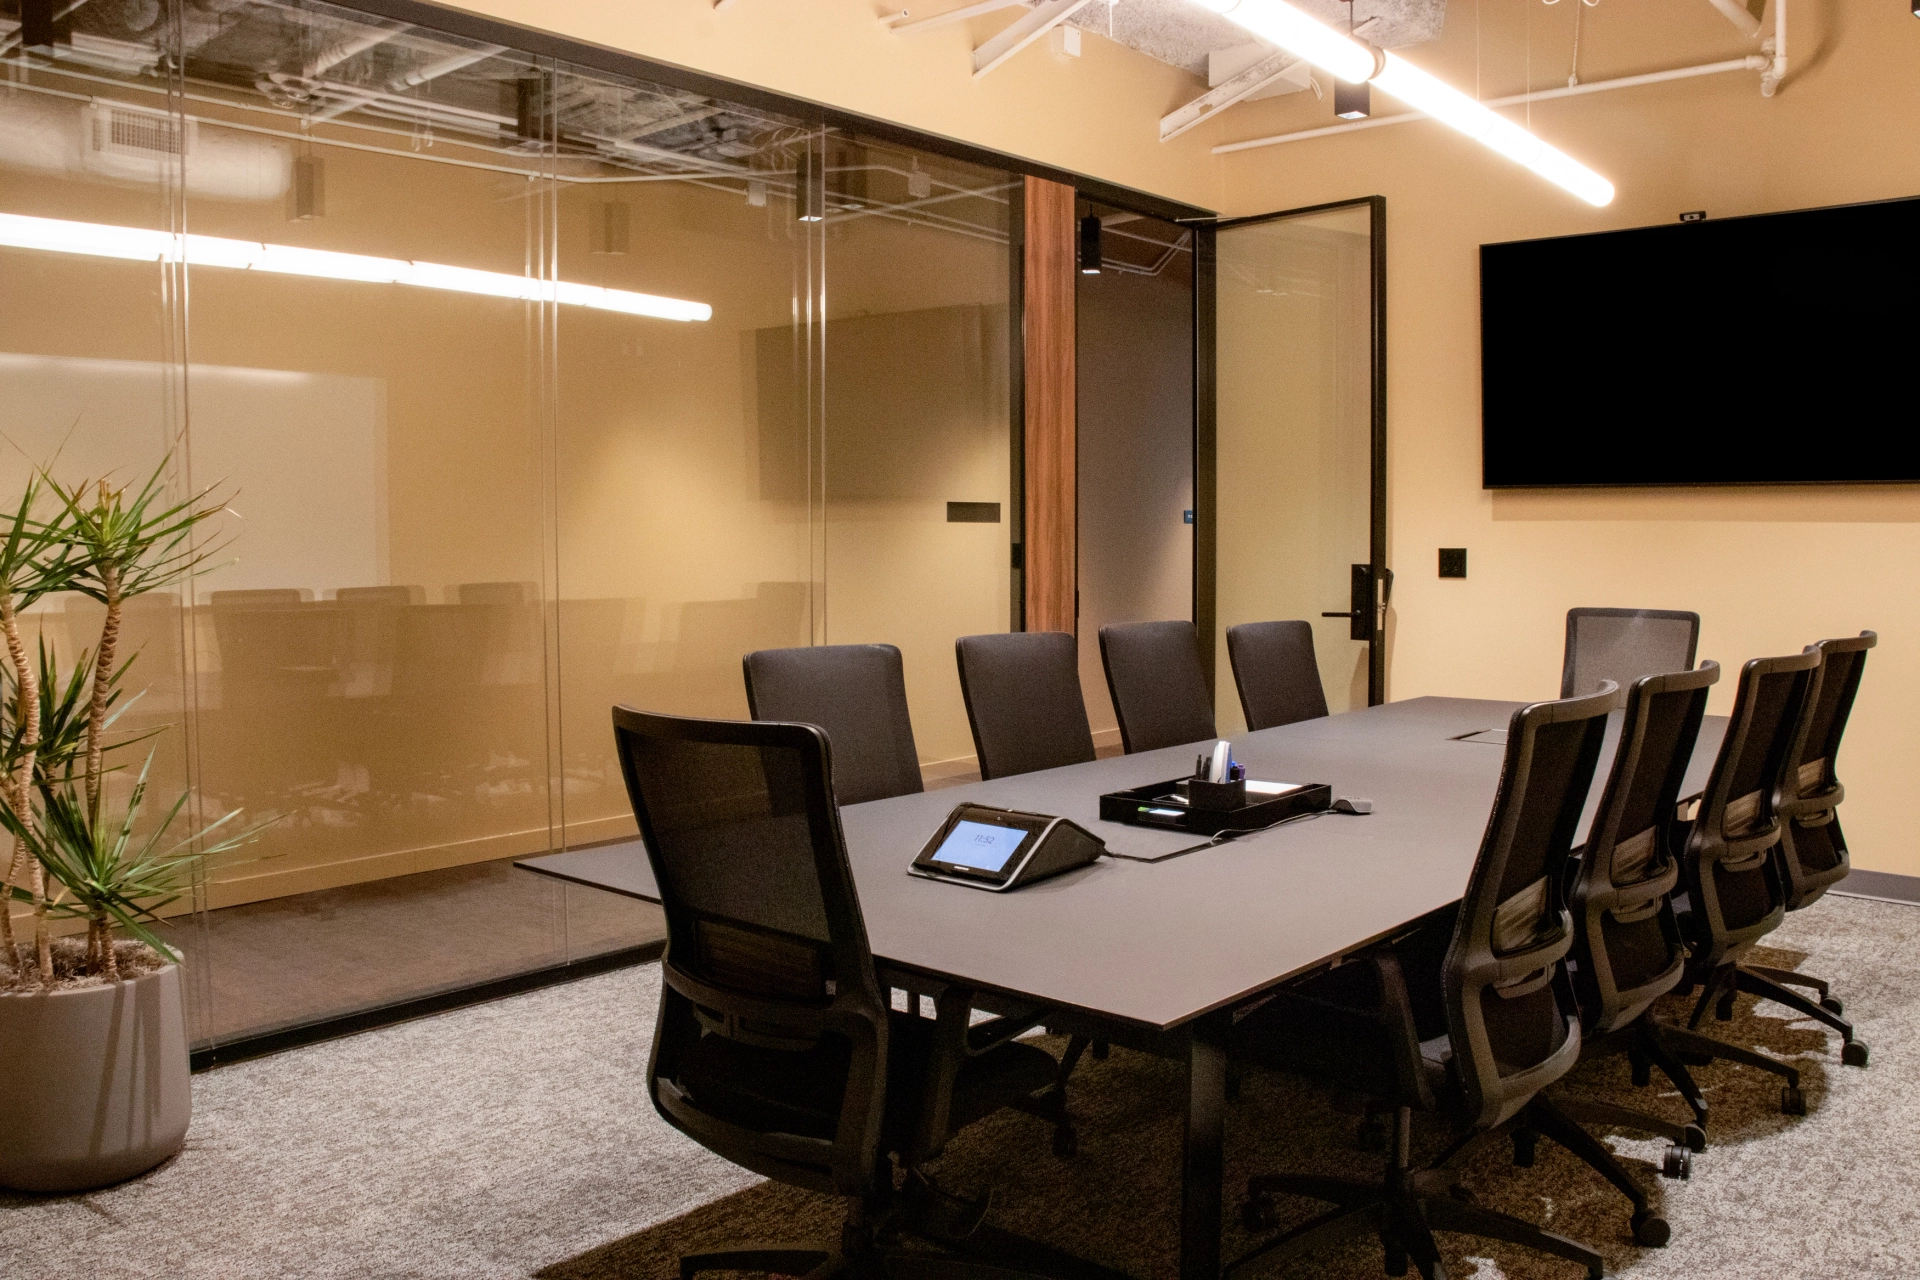 An Atlanta office workspace featuring a glass-walled conference room and chairs.